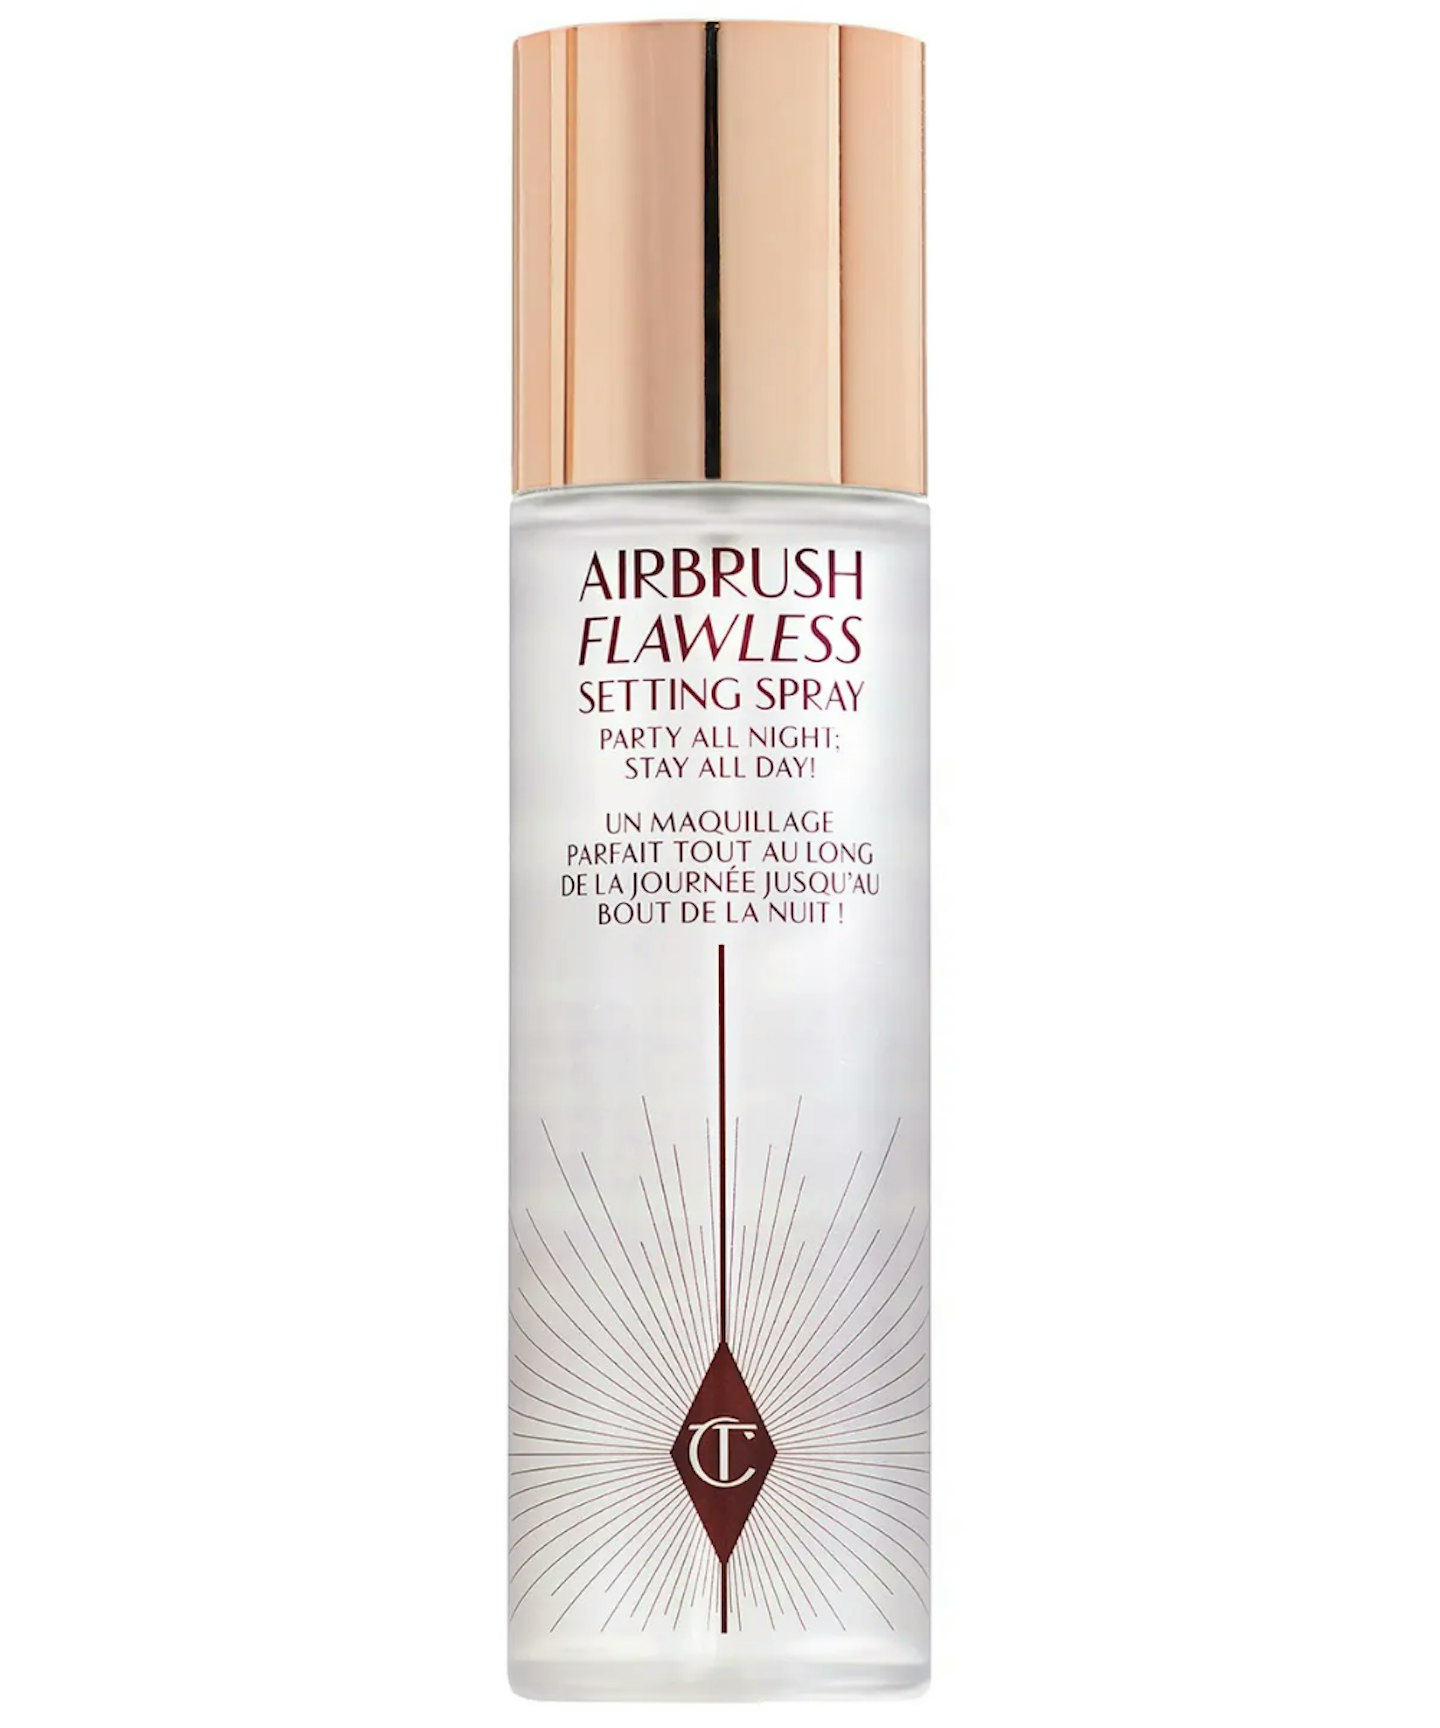 A picture of the Charlotte Tilbury Airbrush Flawless Setting Spray